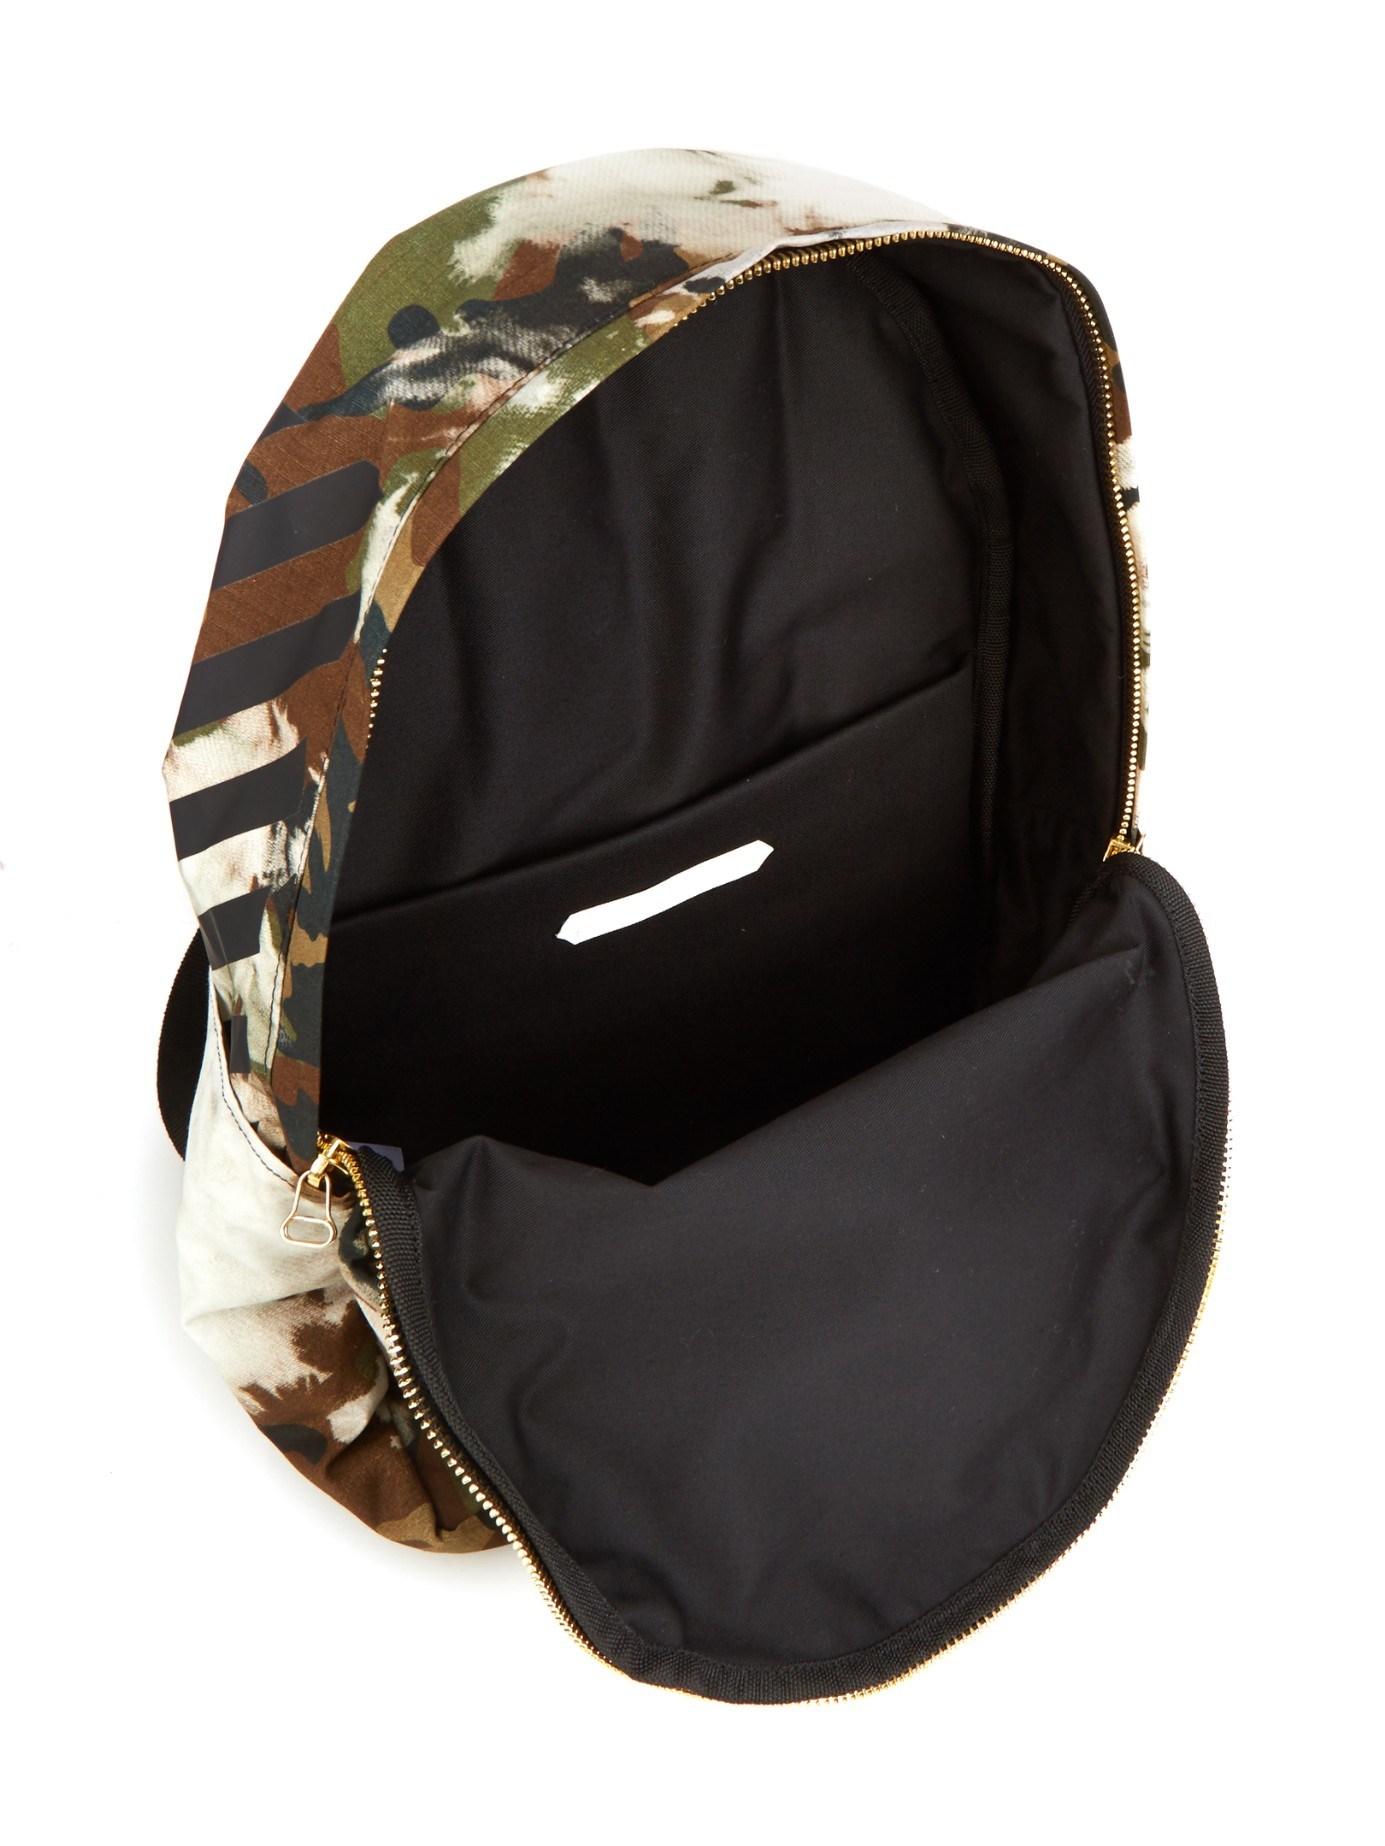 Lyst - Off-White C/O Virgil Abloh Architectural Camo Backpack in Brown for Men